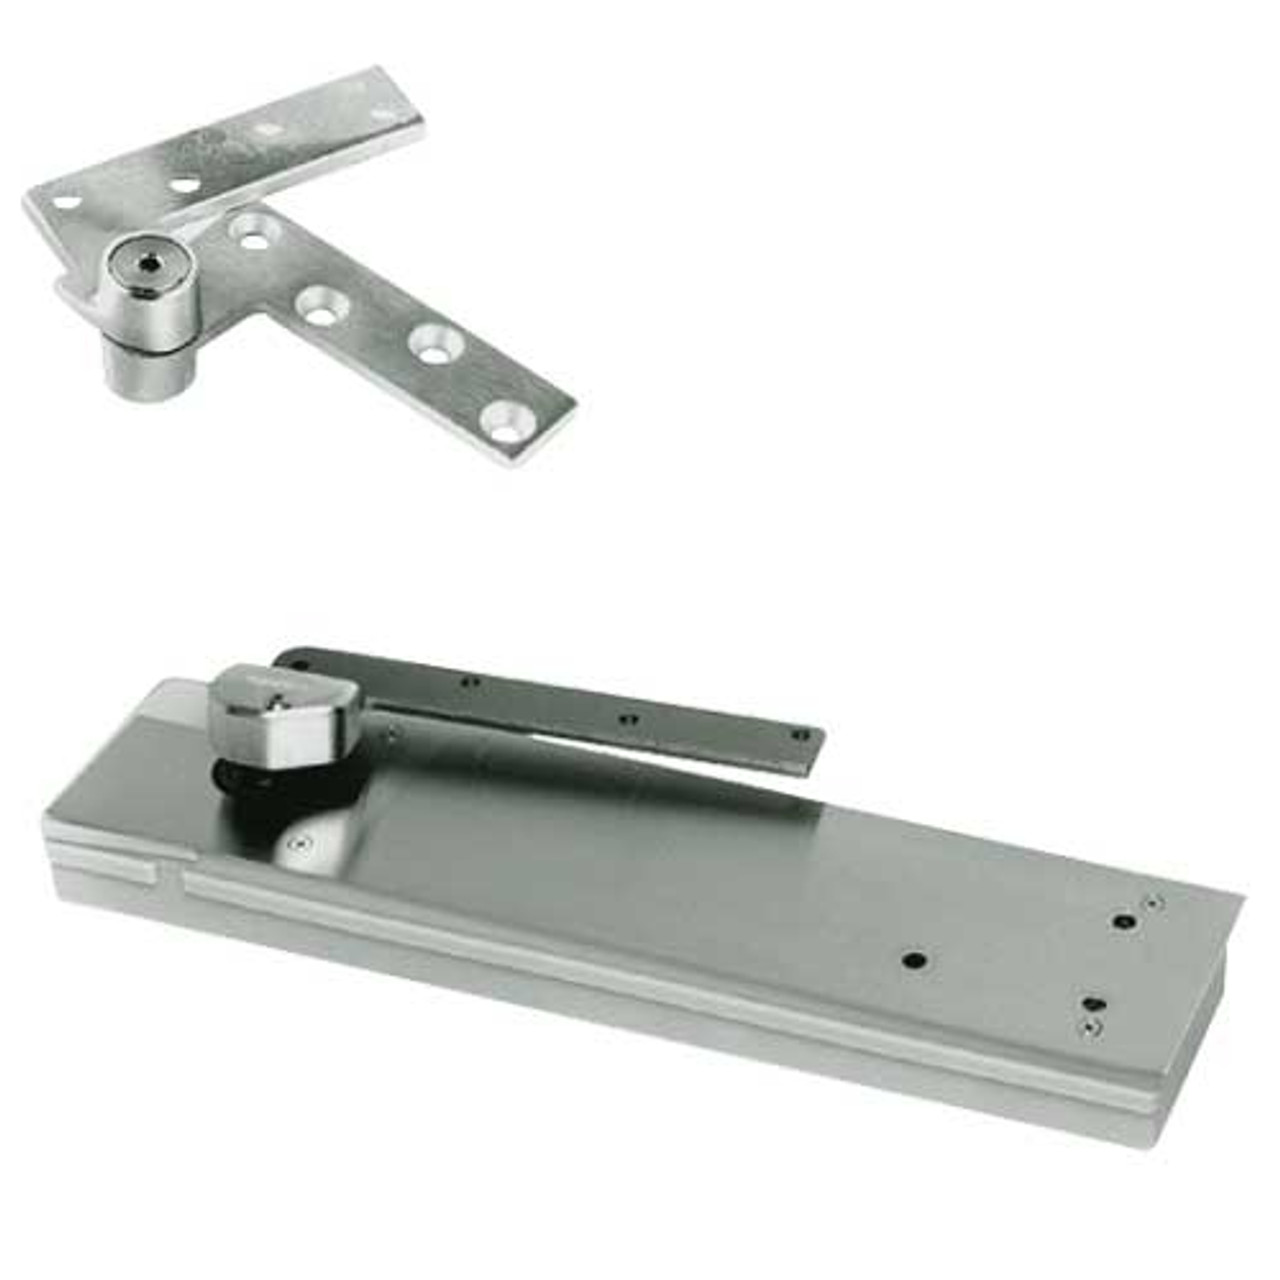 5104ABC180-LFP-LCC-LH-619 Rixson 51 Series 3/4" Offset Hung Shallow Depth Floor Closers in Satin Nickel Finish